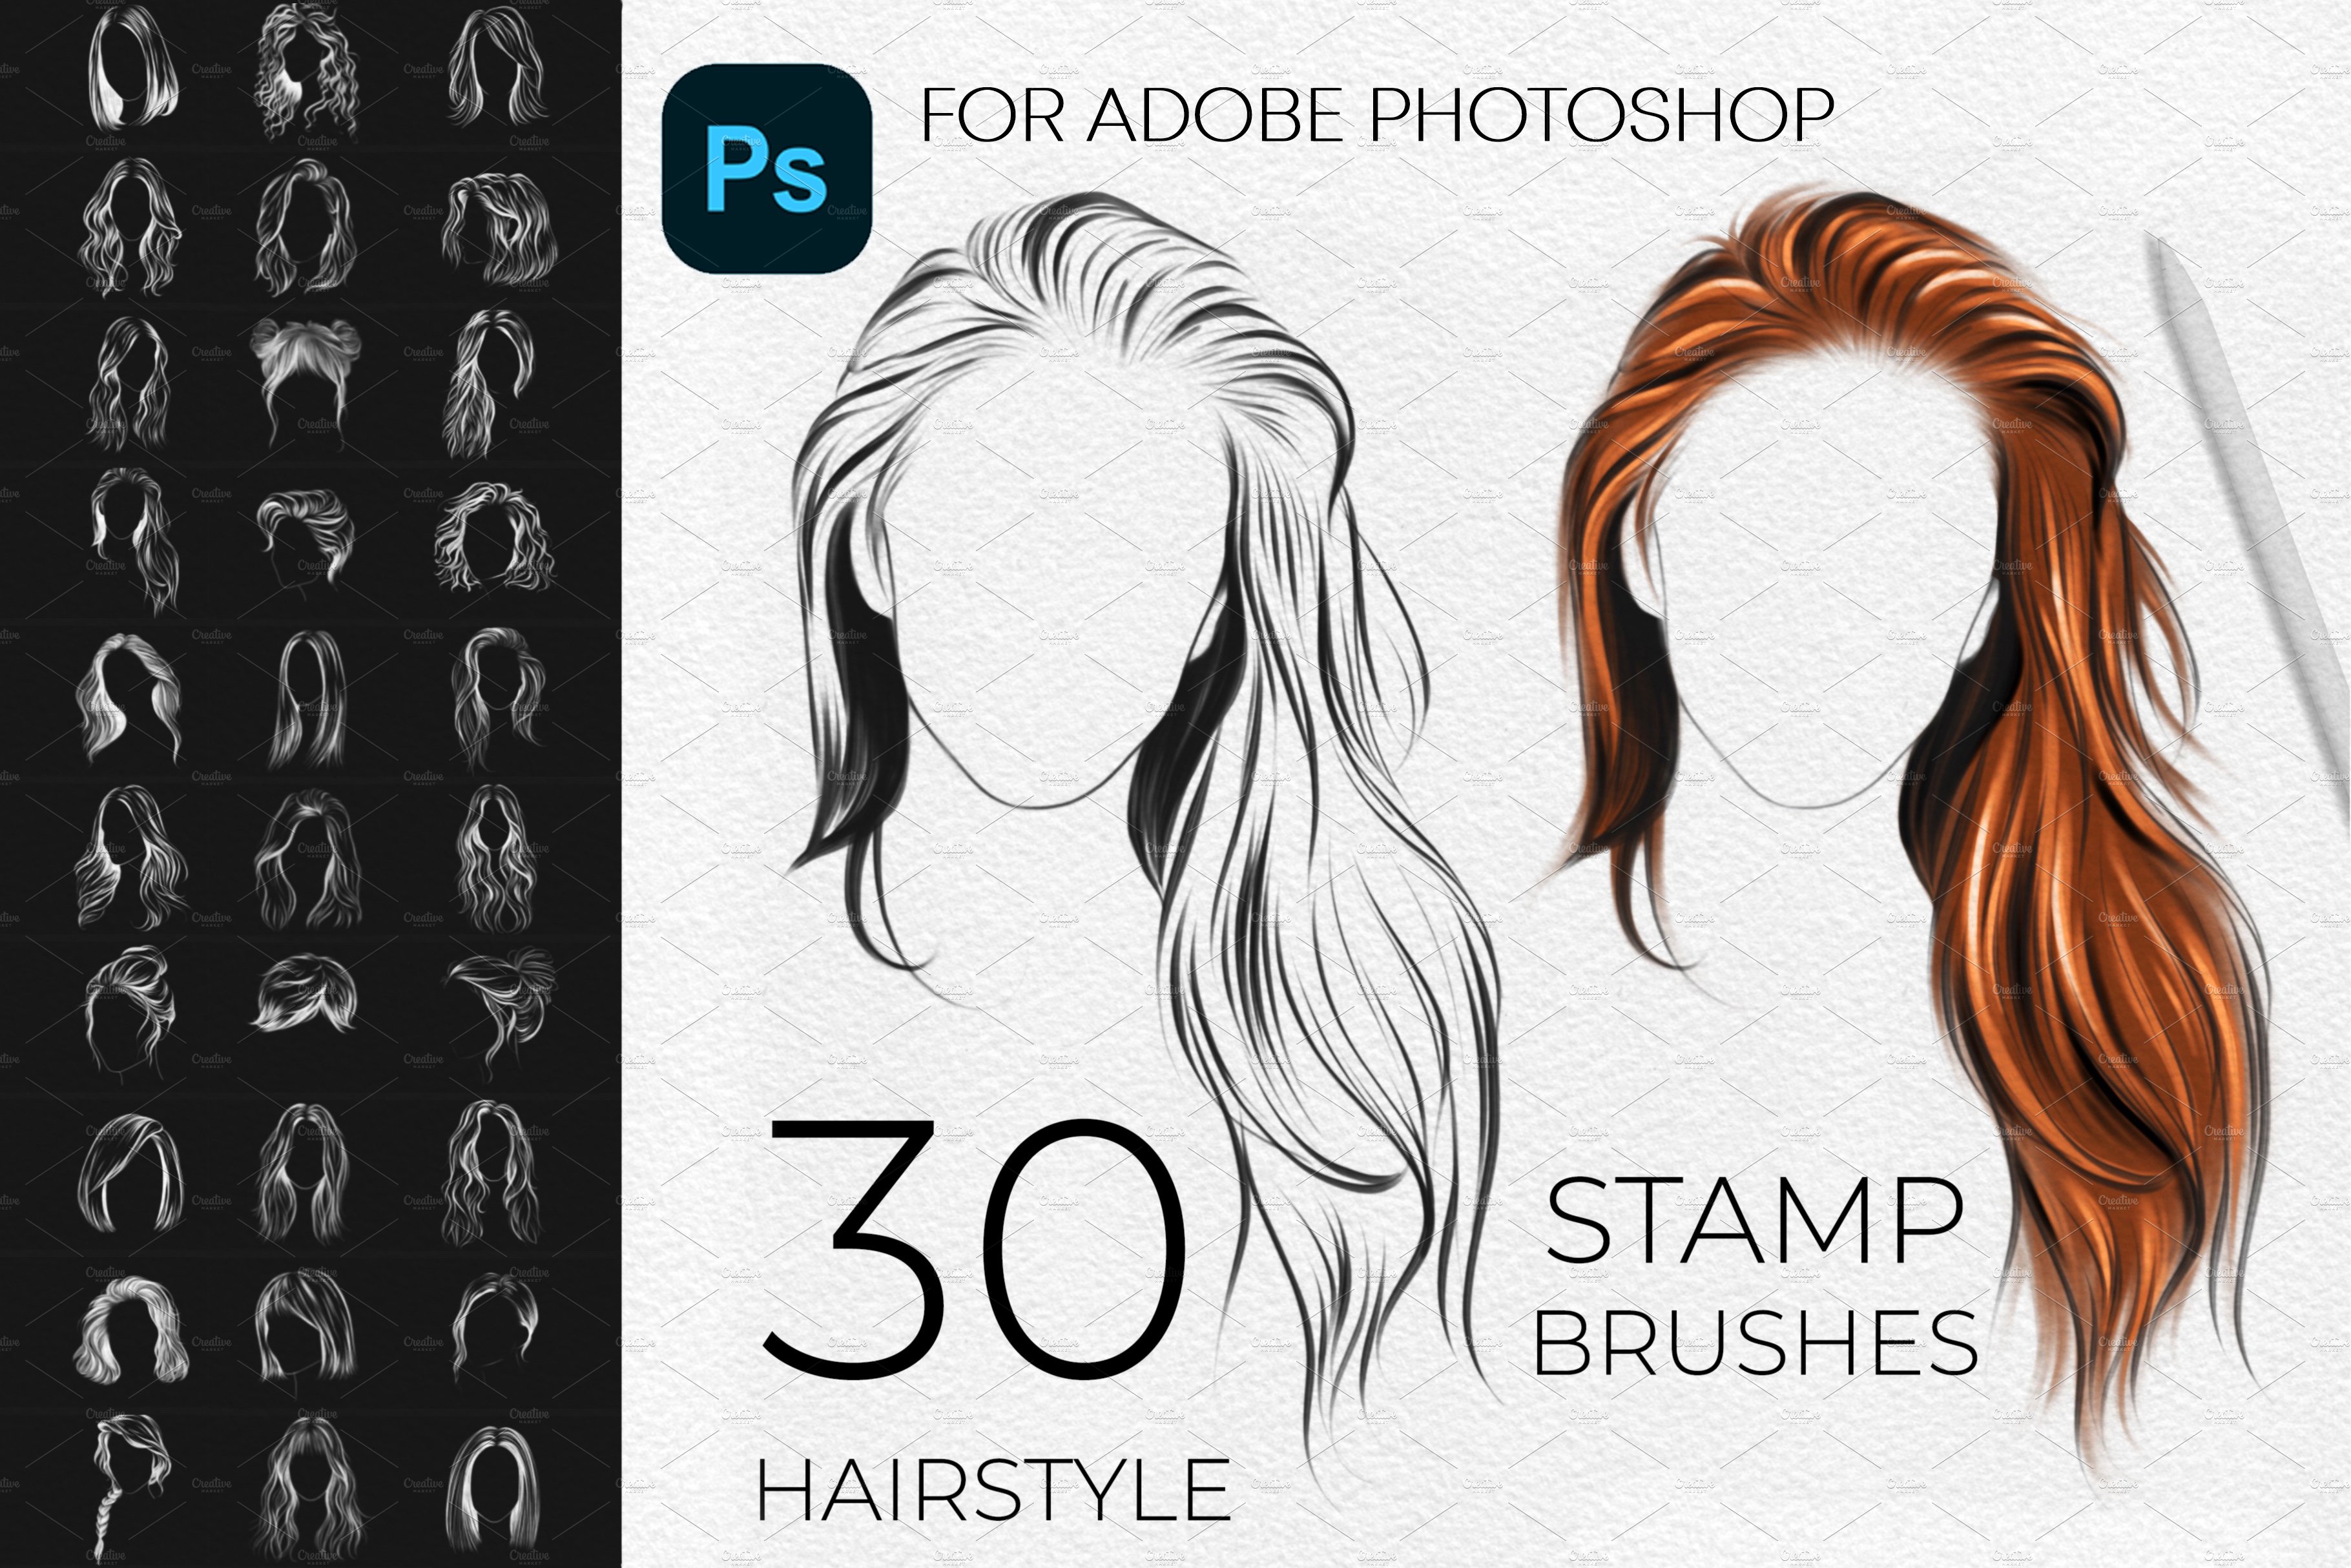 Photoshop Hairstyle Stamps Brushescover image.